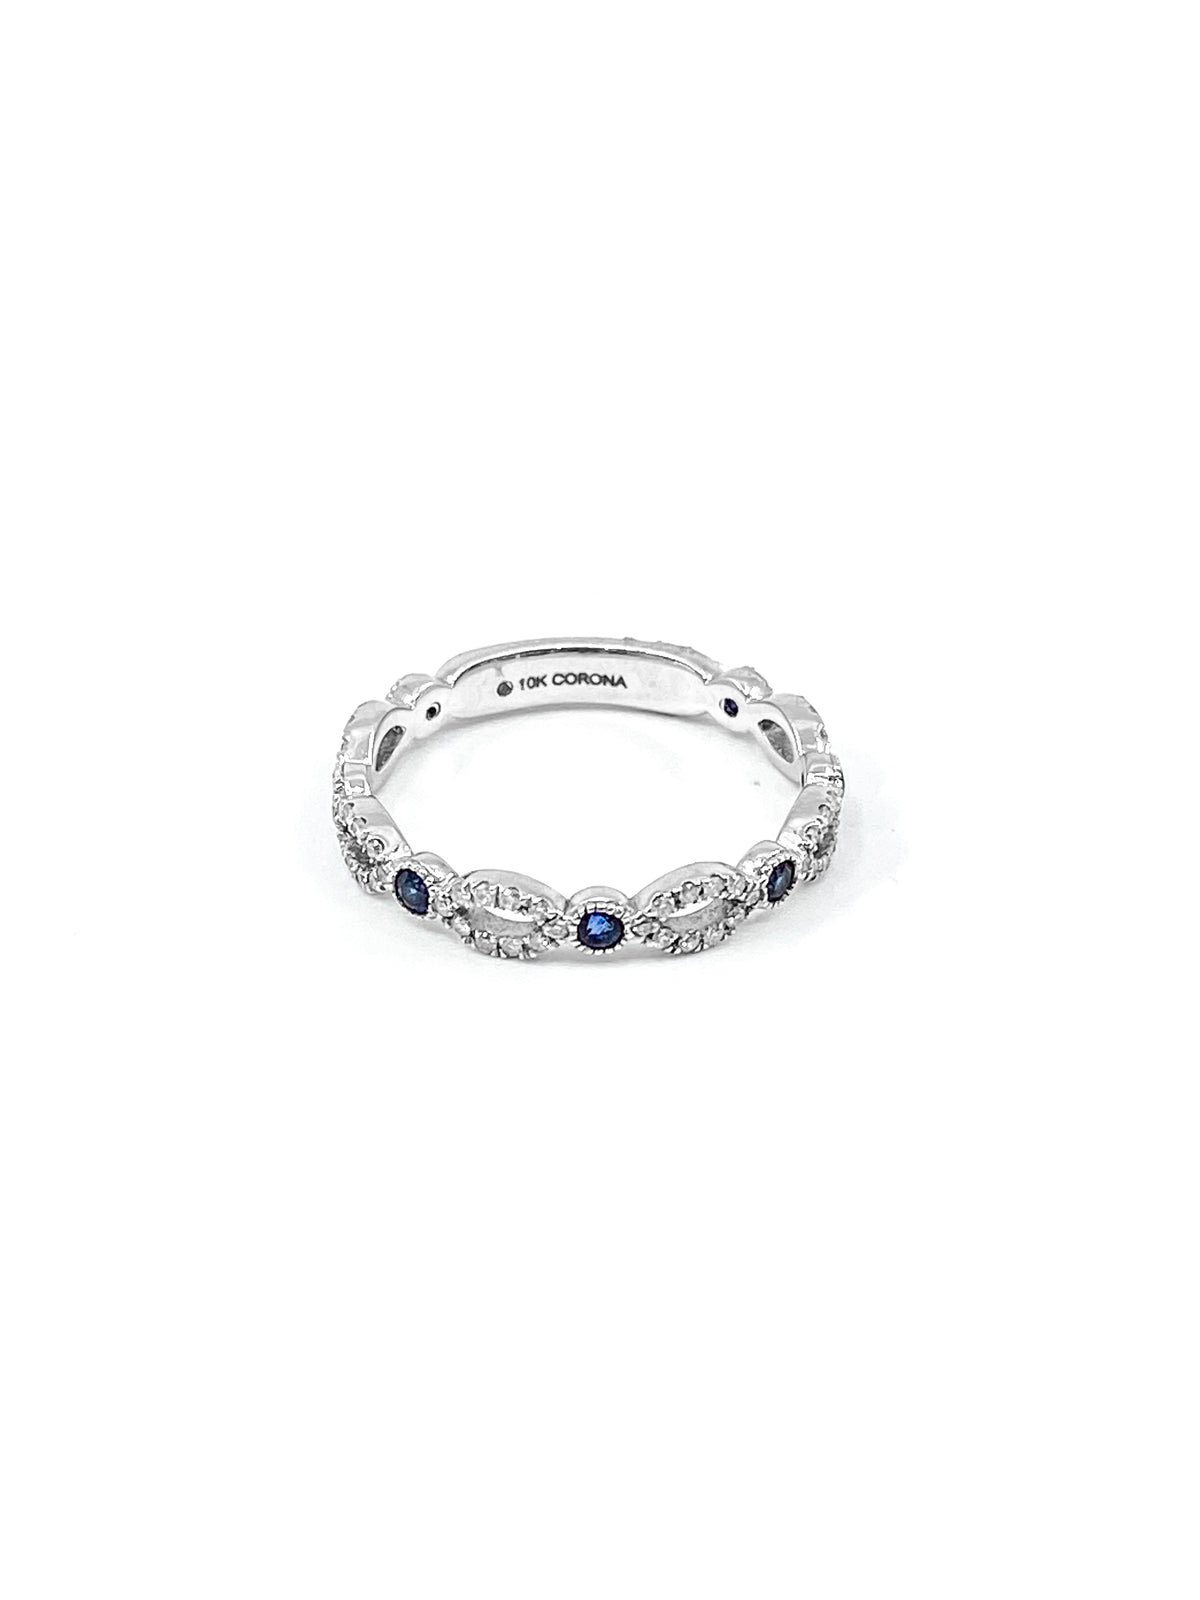 10K White Gold 0.28cttw Genuine Sapphire and 0.18cttw Diamond Ring, size 6.5